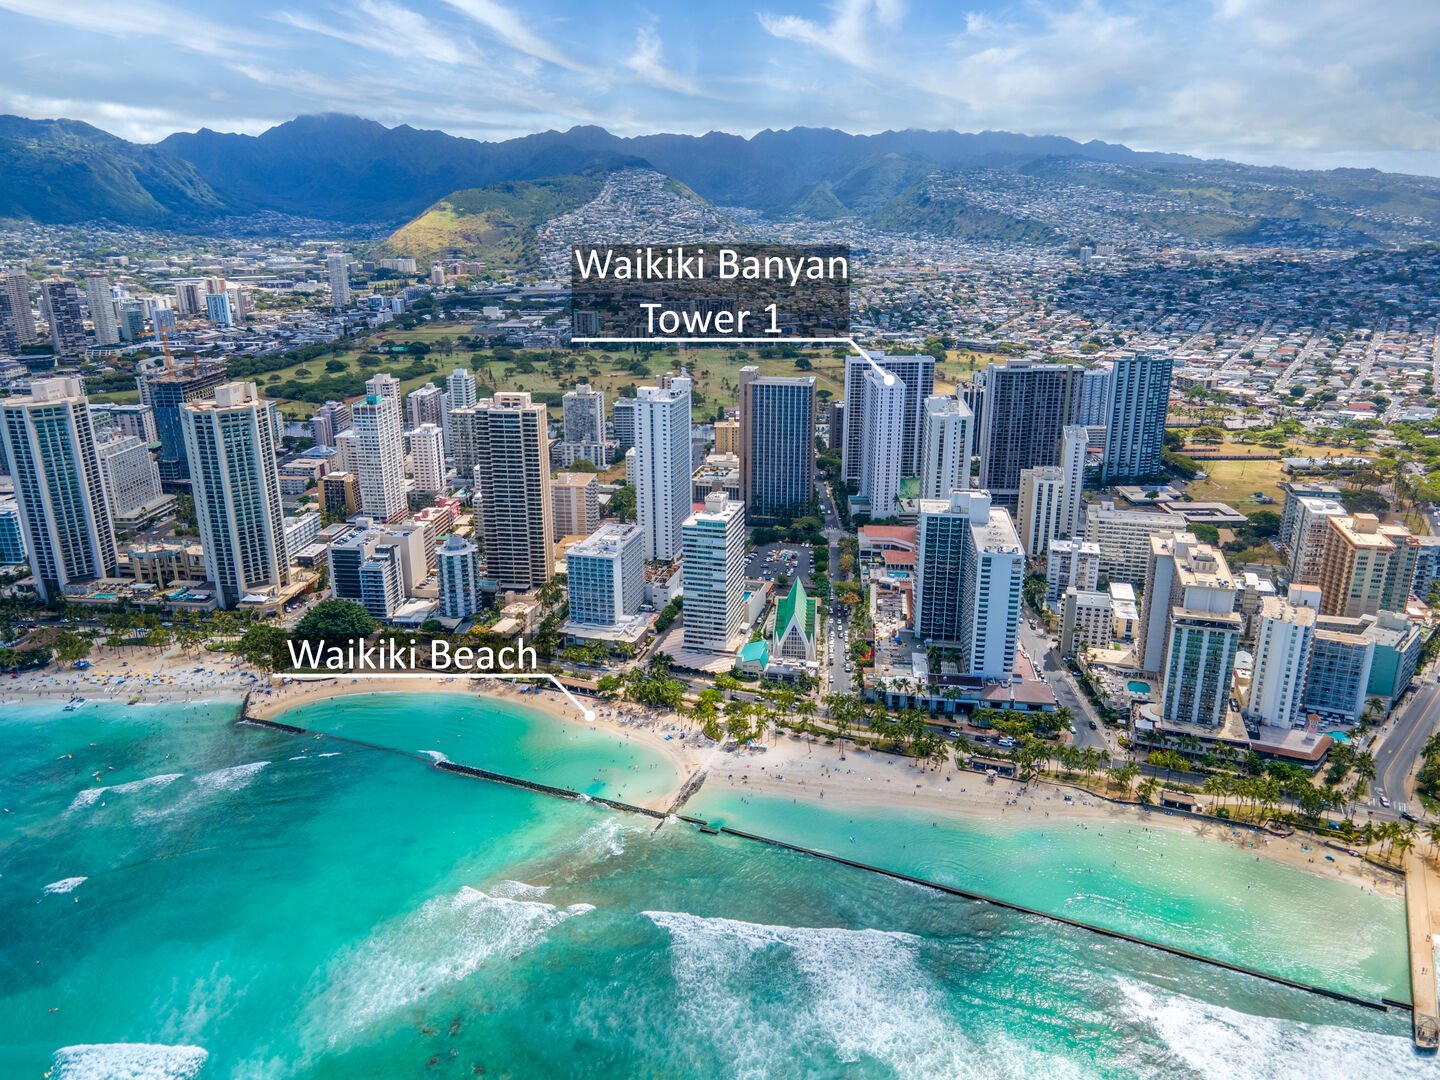 Waikiki Banyan is only one block away from the beach!